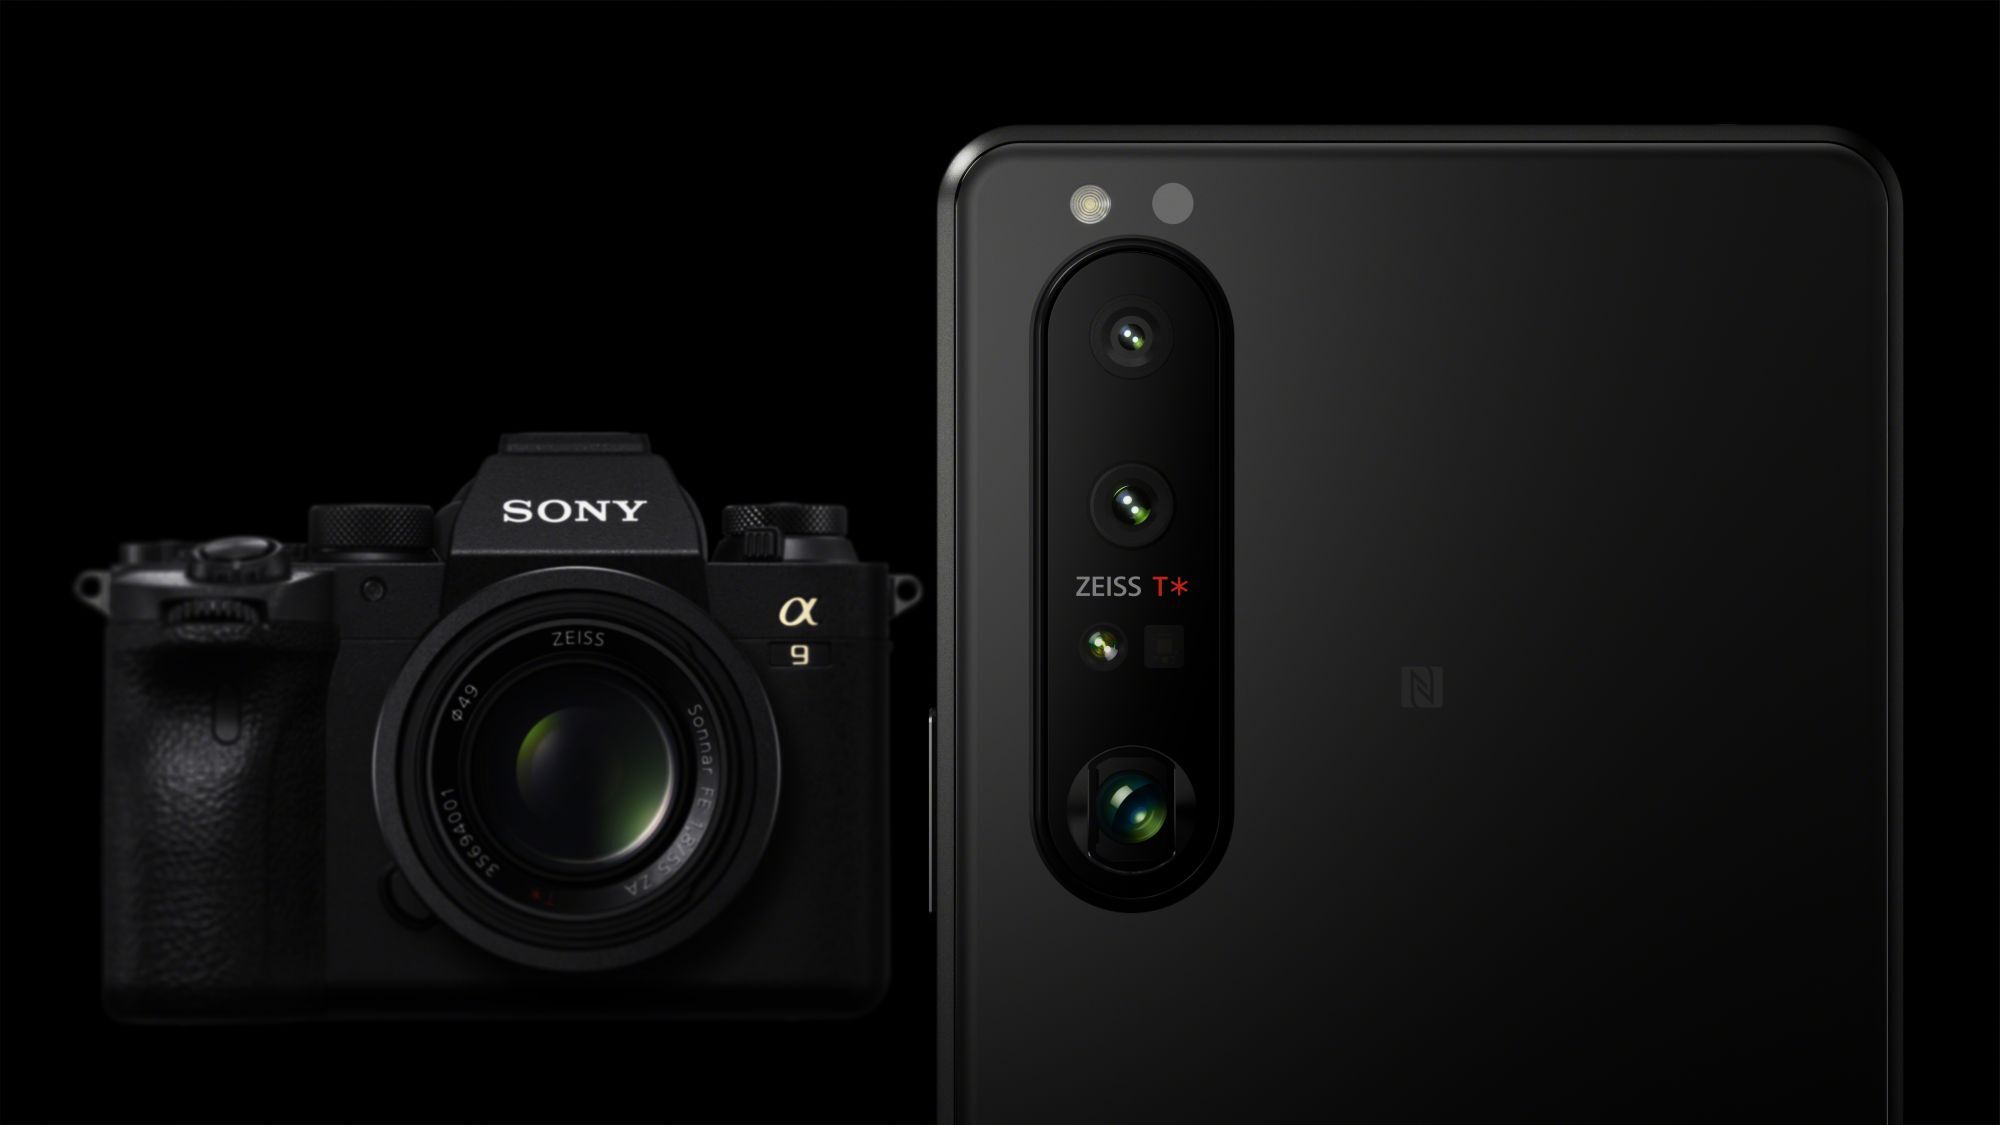 Sony debuts the Xperia 1 III and Xperia 5 III - first phones with variable telephoto lenses